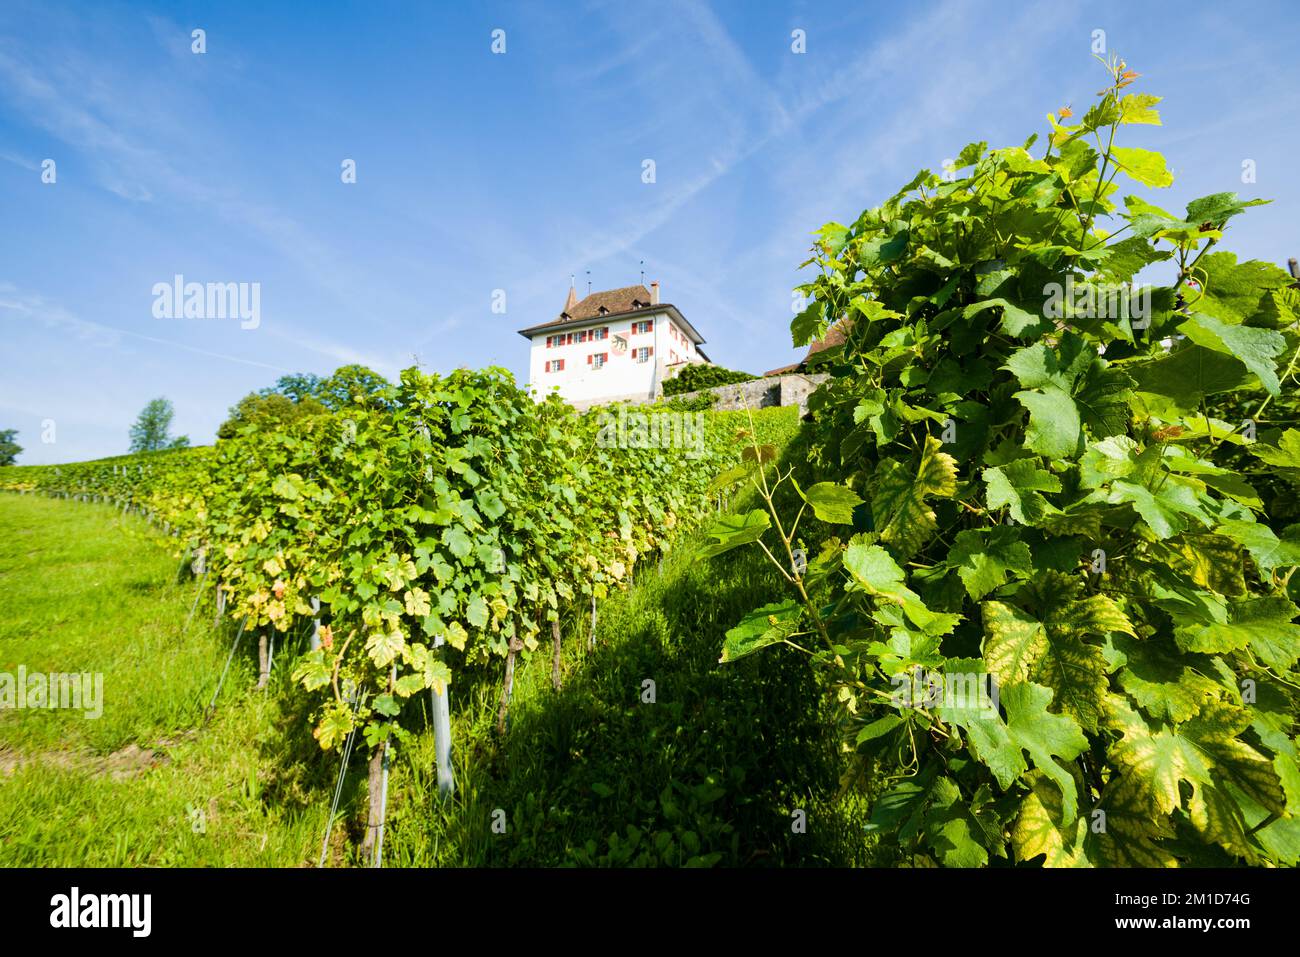 The Erlach Castle is located on a hill and surrounded by wine yards Stock Photo